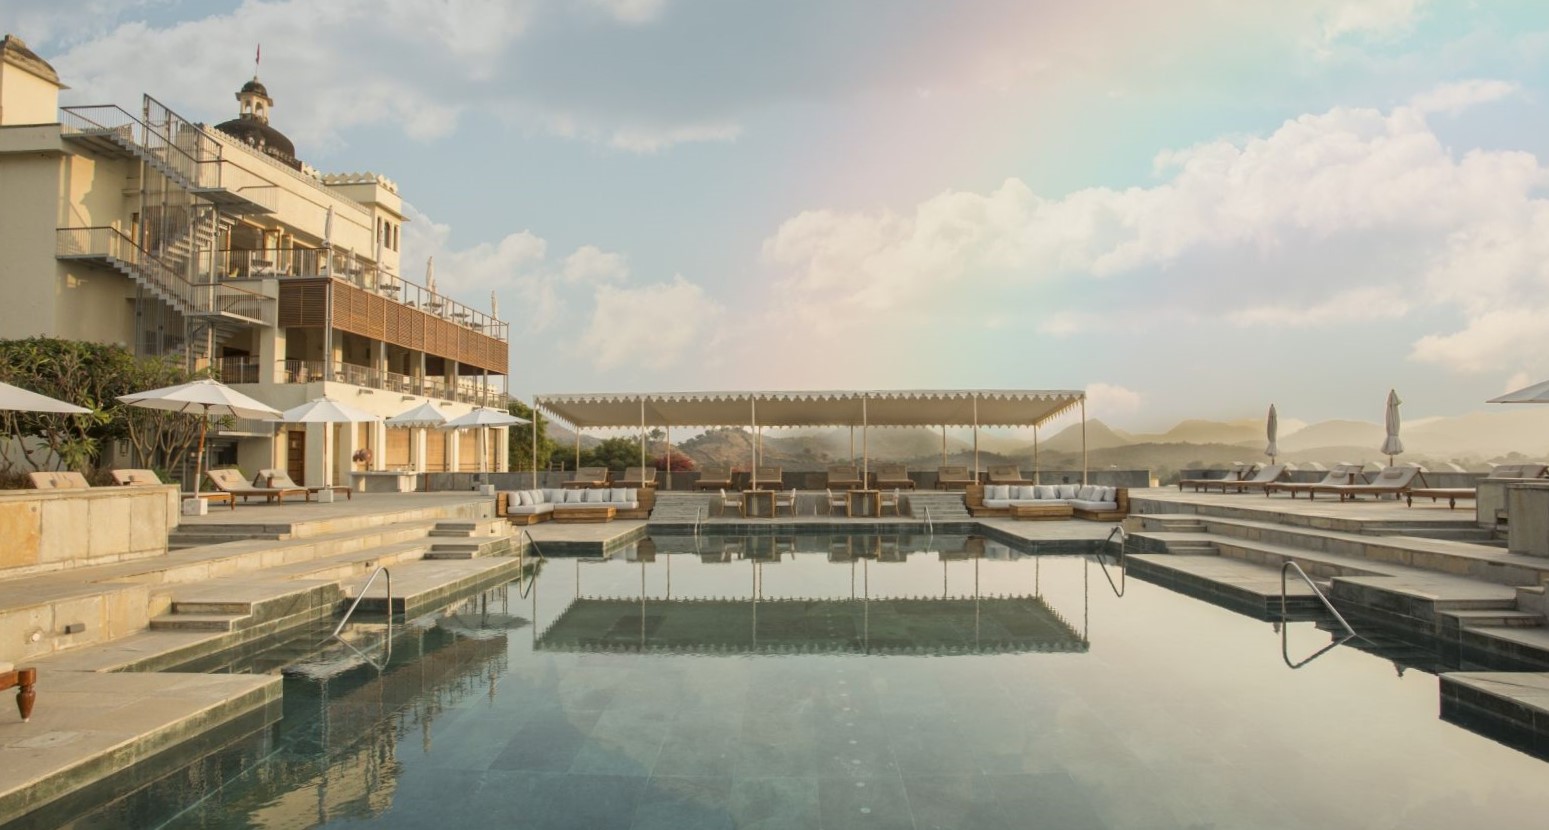 Swimming pool at the RAAS Devigarh hotel near Udaipur India